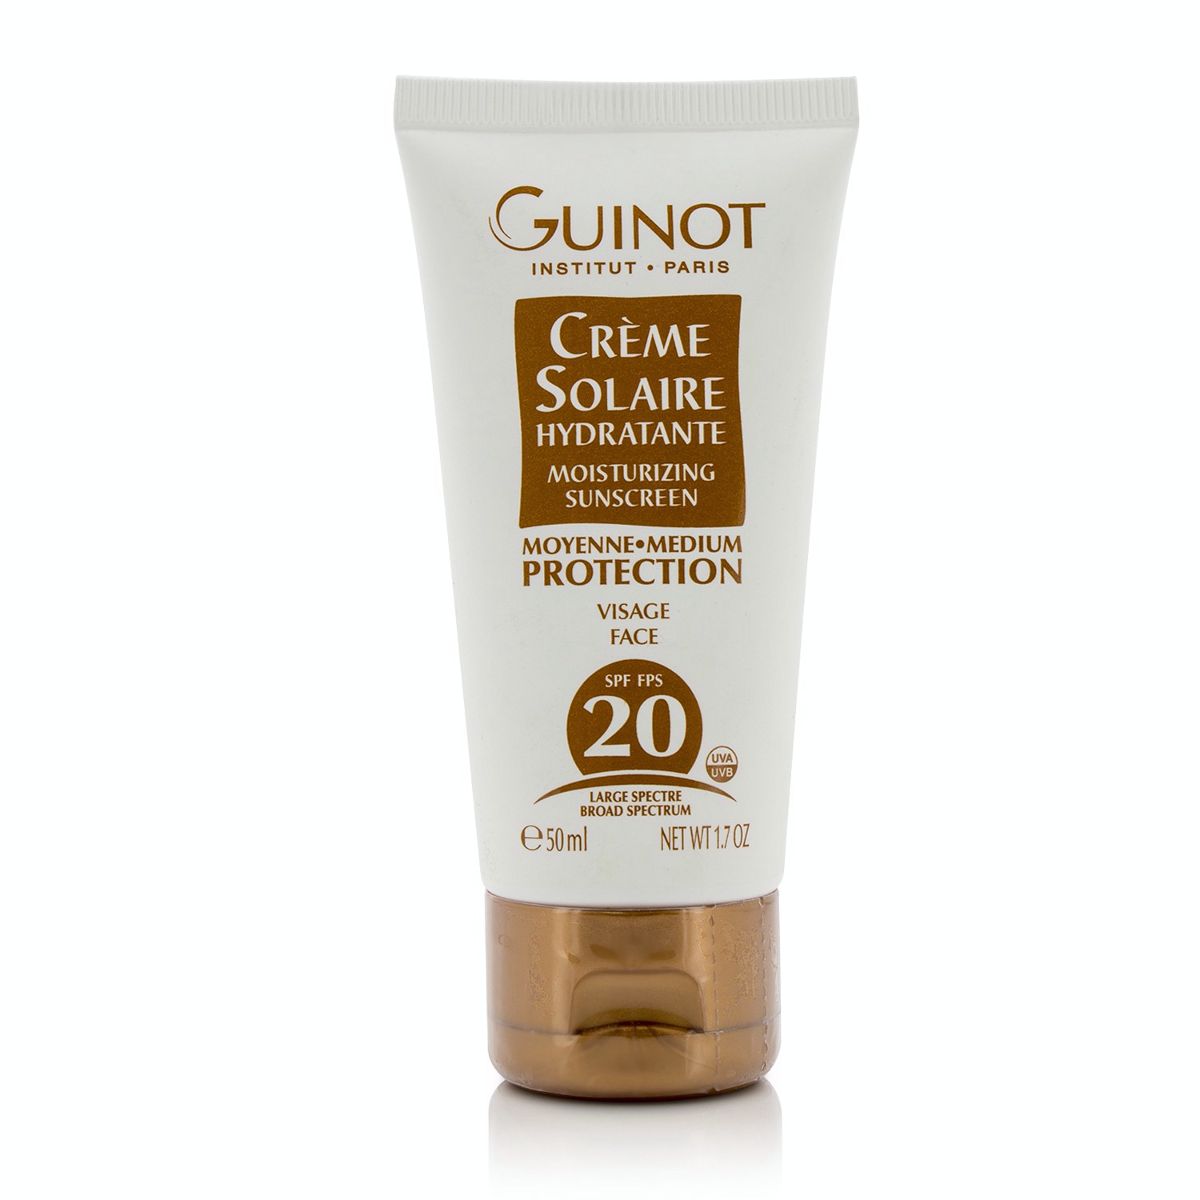 Creme Solaire Hydratante Moisturizing Sunscreen For Face SPF20 Guinot Image